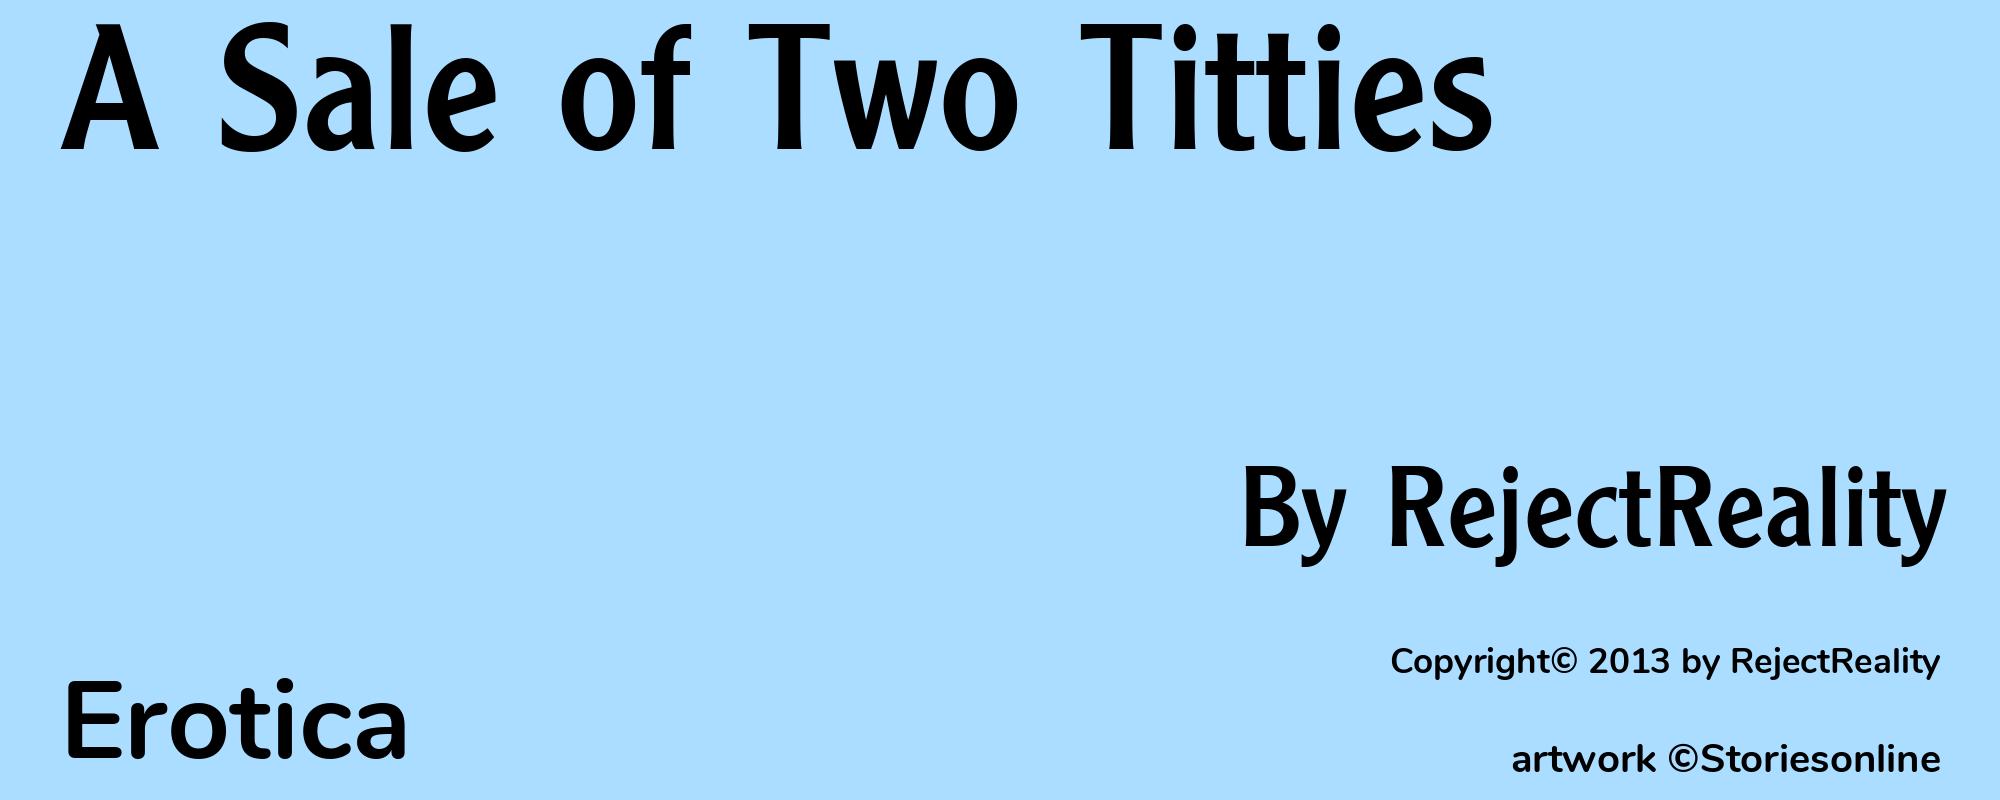 A Sale of Two Titties - Cover